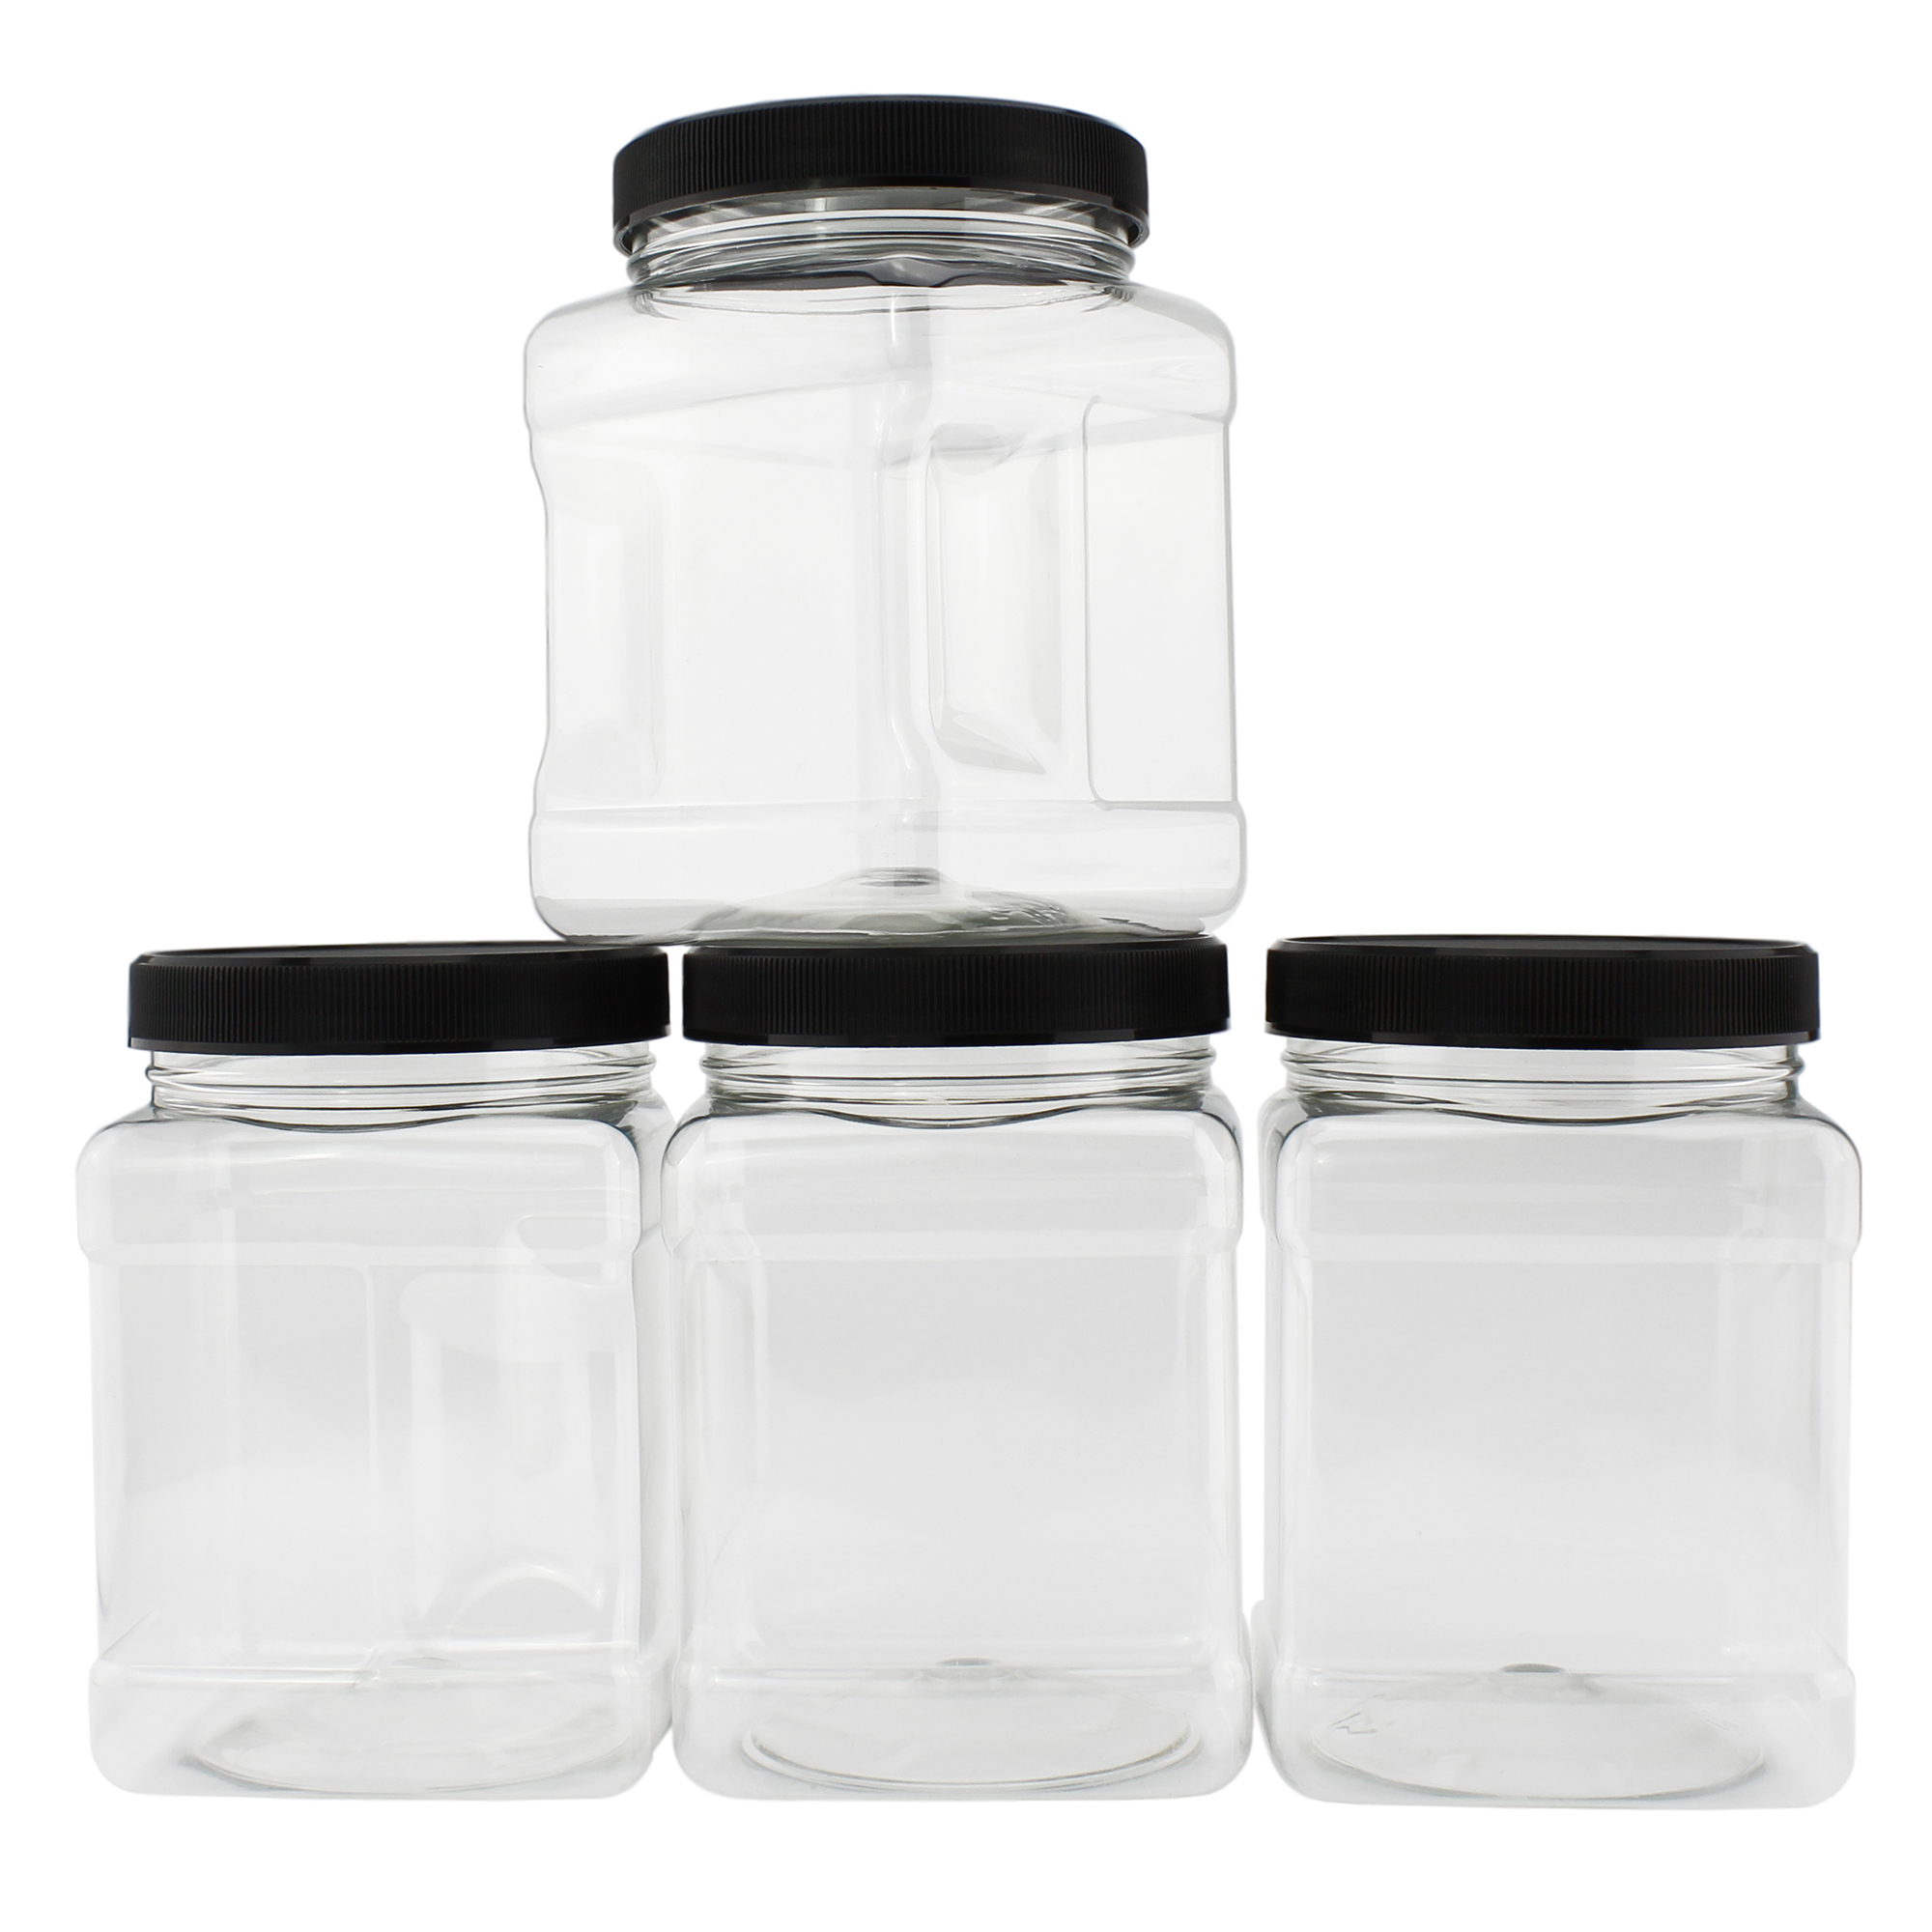 32oz Square Plastic Jars (4-Pack, Quart); Clear Rectangular 4-Cup Canisters w/Black Lids, Easy-Grip Side - image 1 of 6